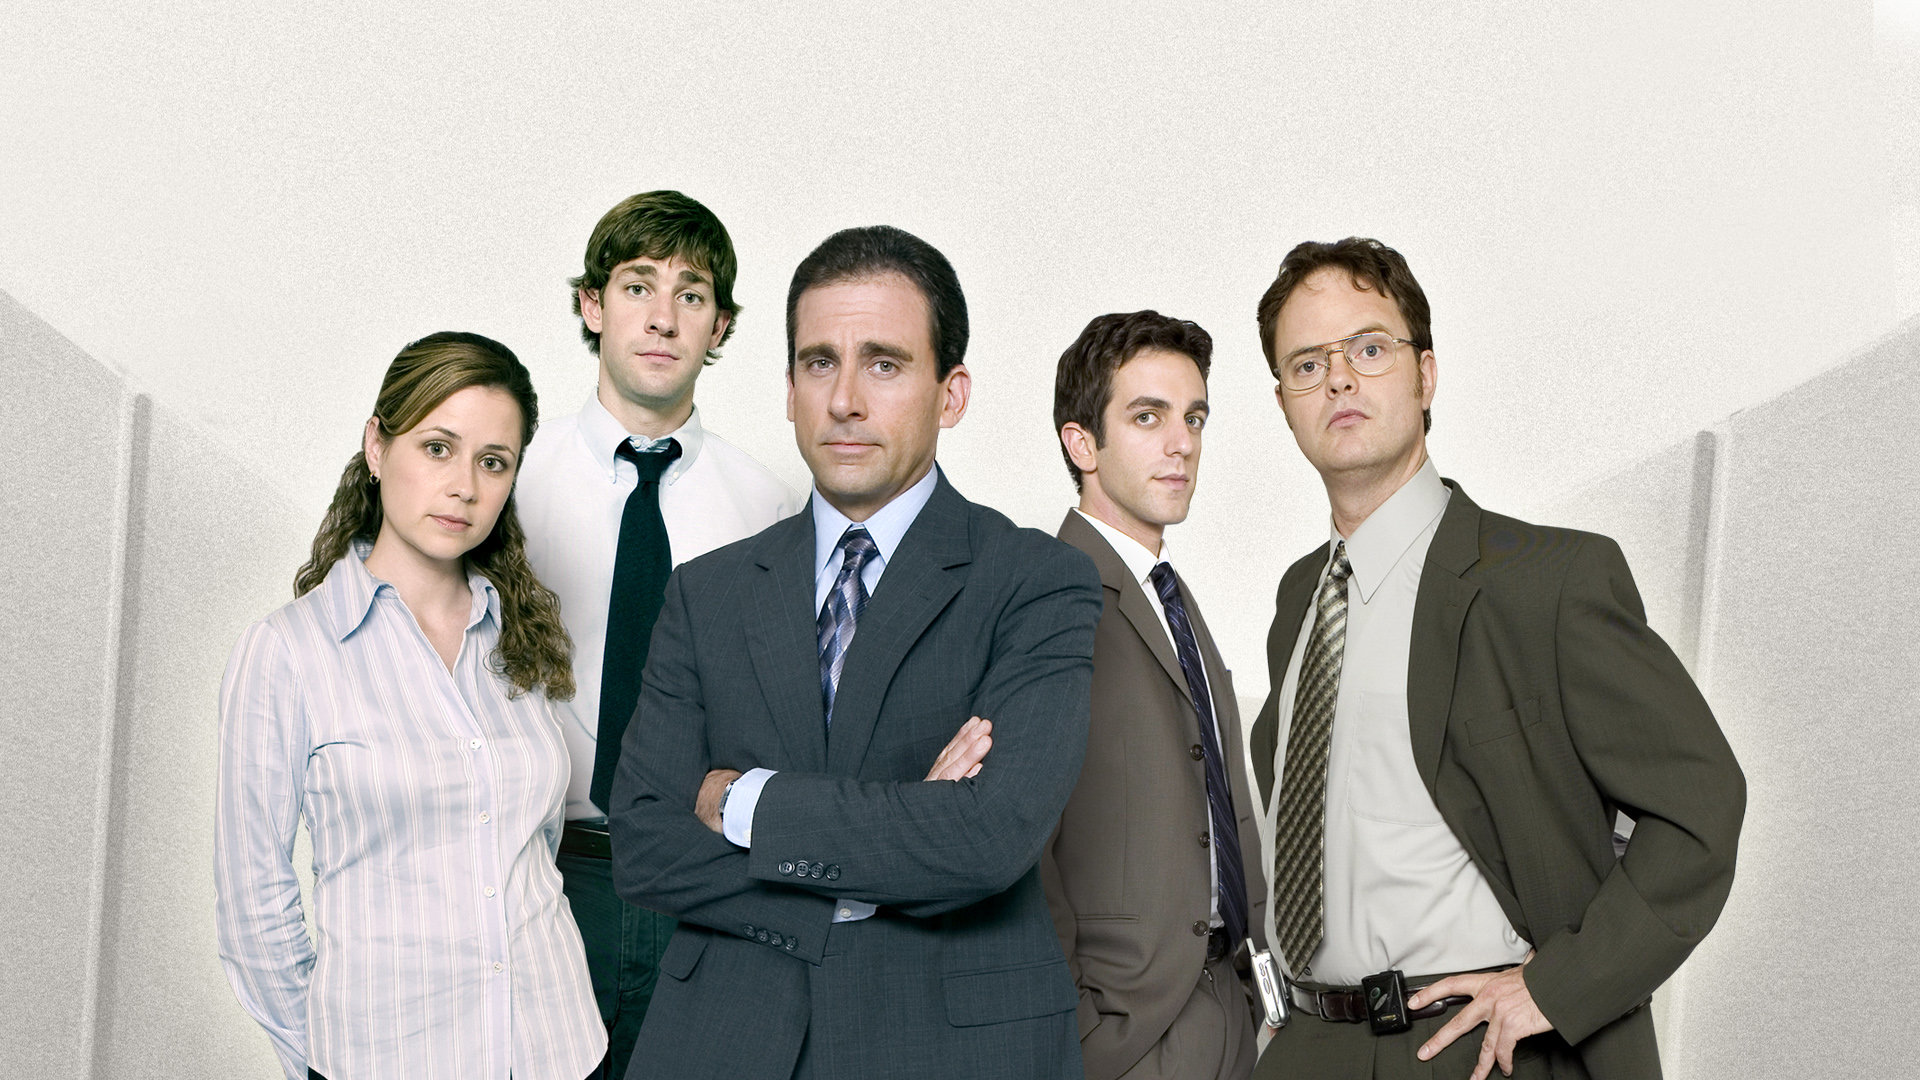 The Office Us Wallpapers 1920x1080 Full Hd 1080p Desktop Backgrounds